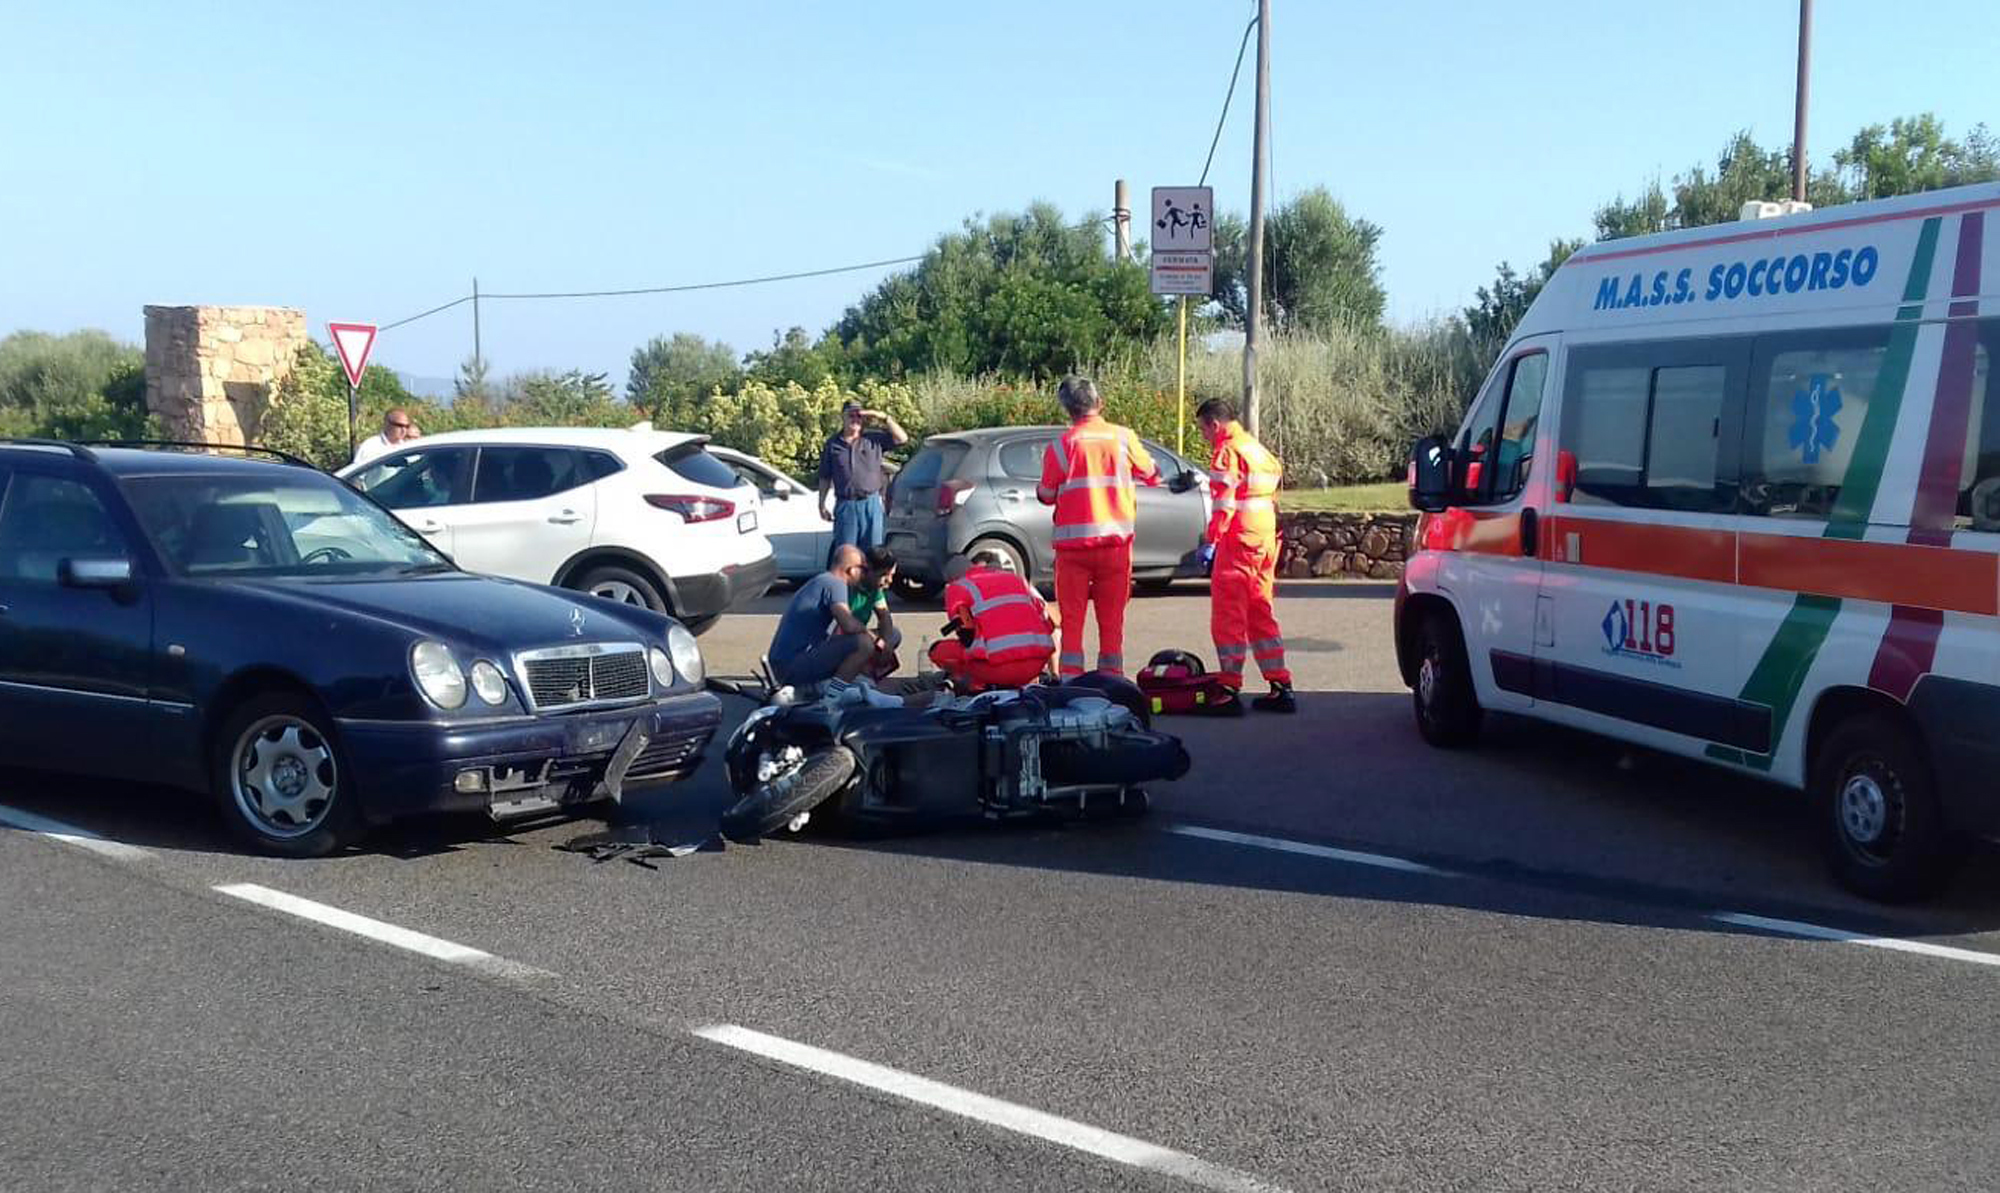 PHOTO: Ambulance personnel tend to George Clooney, after being involved in a scooter accident near Olbia, on the Sardinia island, Italy, July 10, 2018.